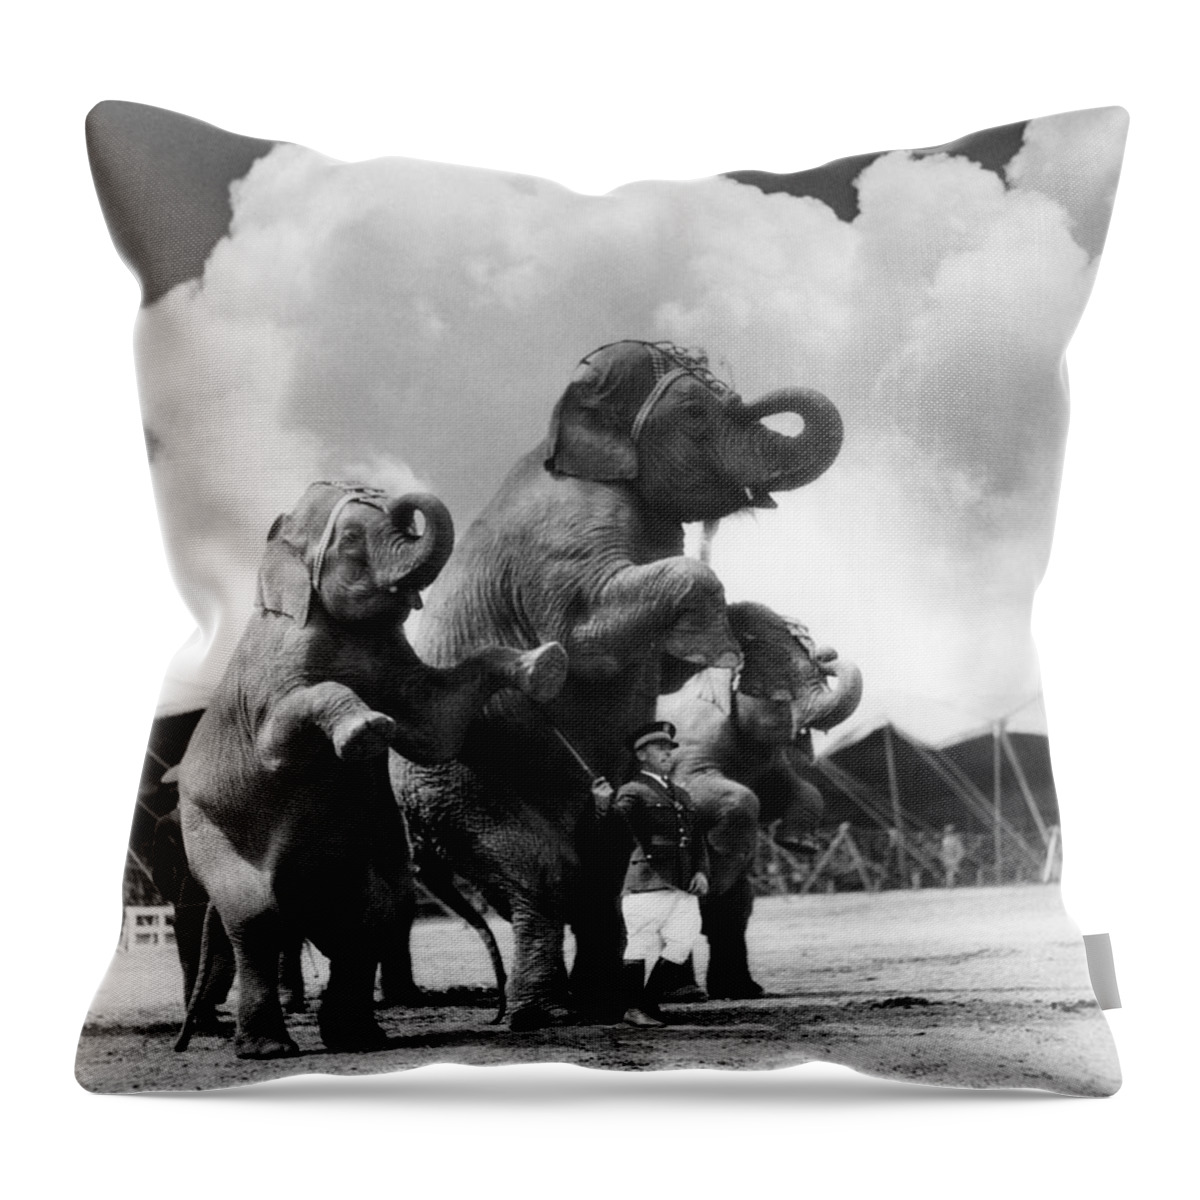 1930s Throw Pillow featuring the photograph Circus Trainer With Elephants, C.1930s by H. Armstrong Roberts/ClassicStock